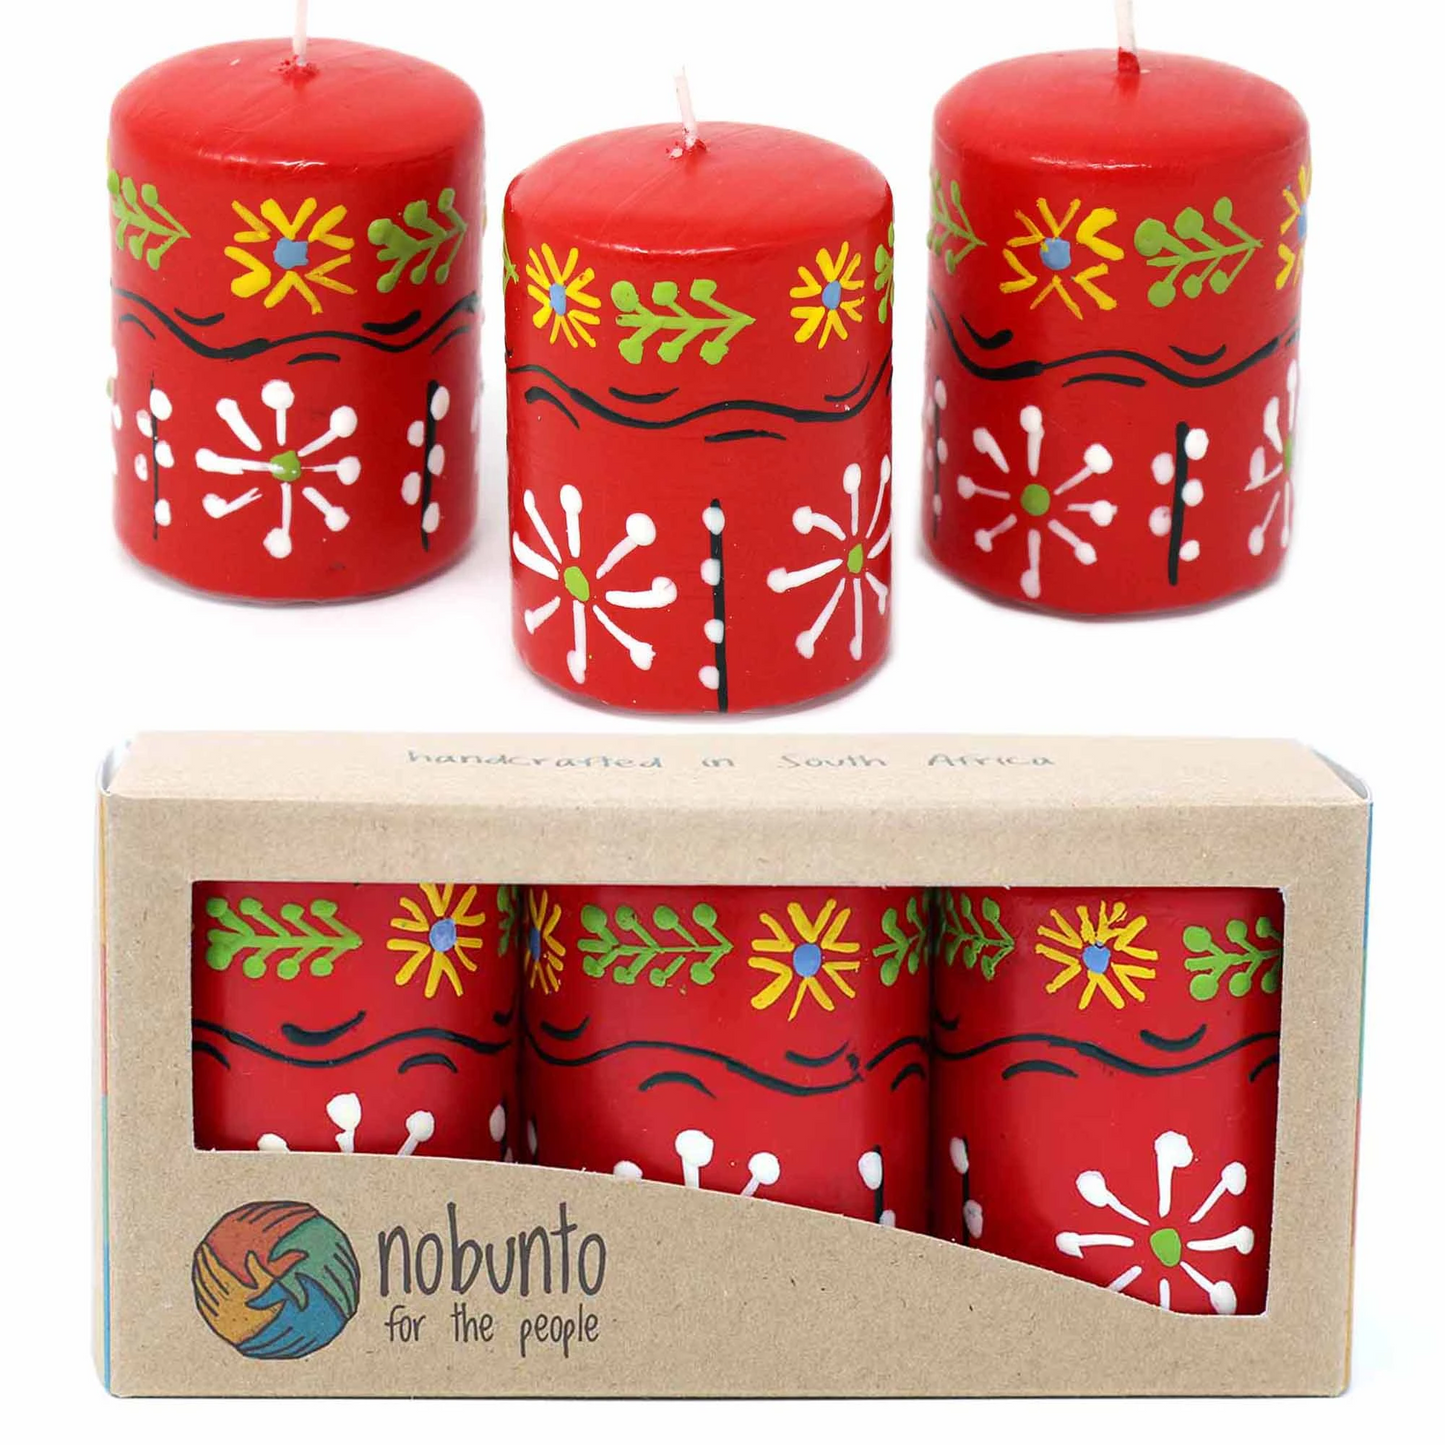 Hand-Painted Red Votive Candles, Boxed Set of 3 (Masika Design)